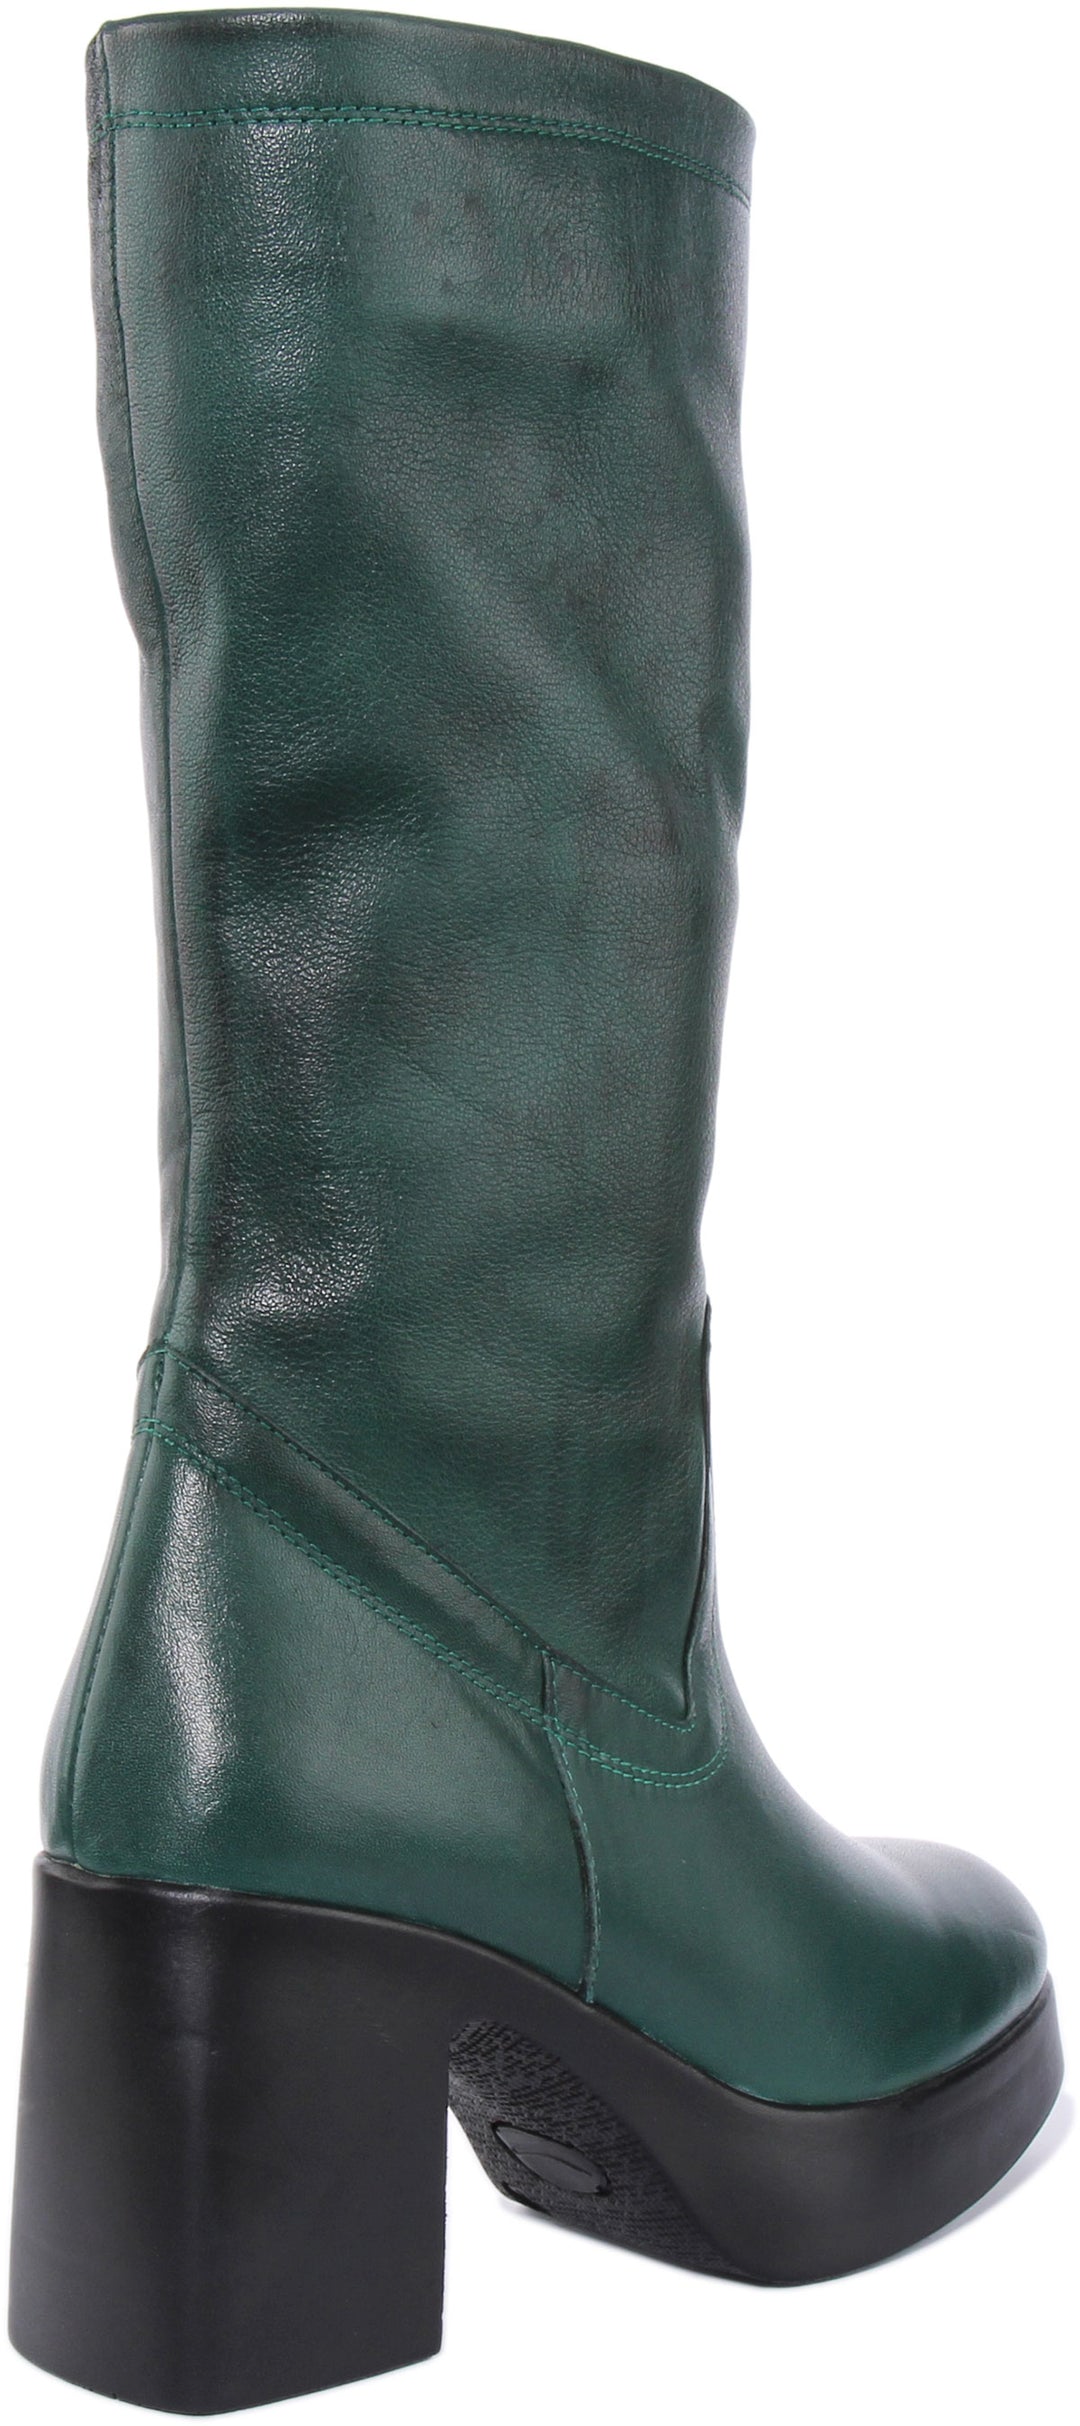 Justinreess England Knee High Boot Paola Knee High Boot In Green